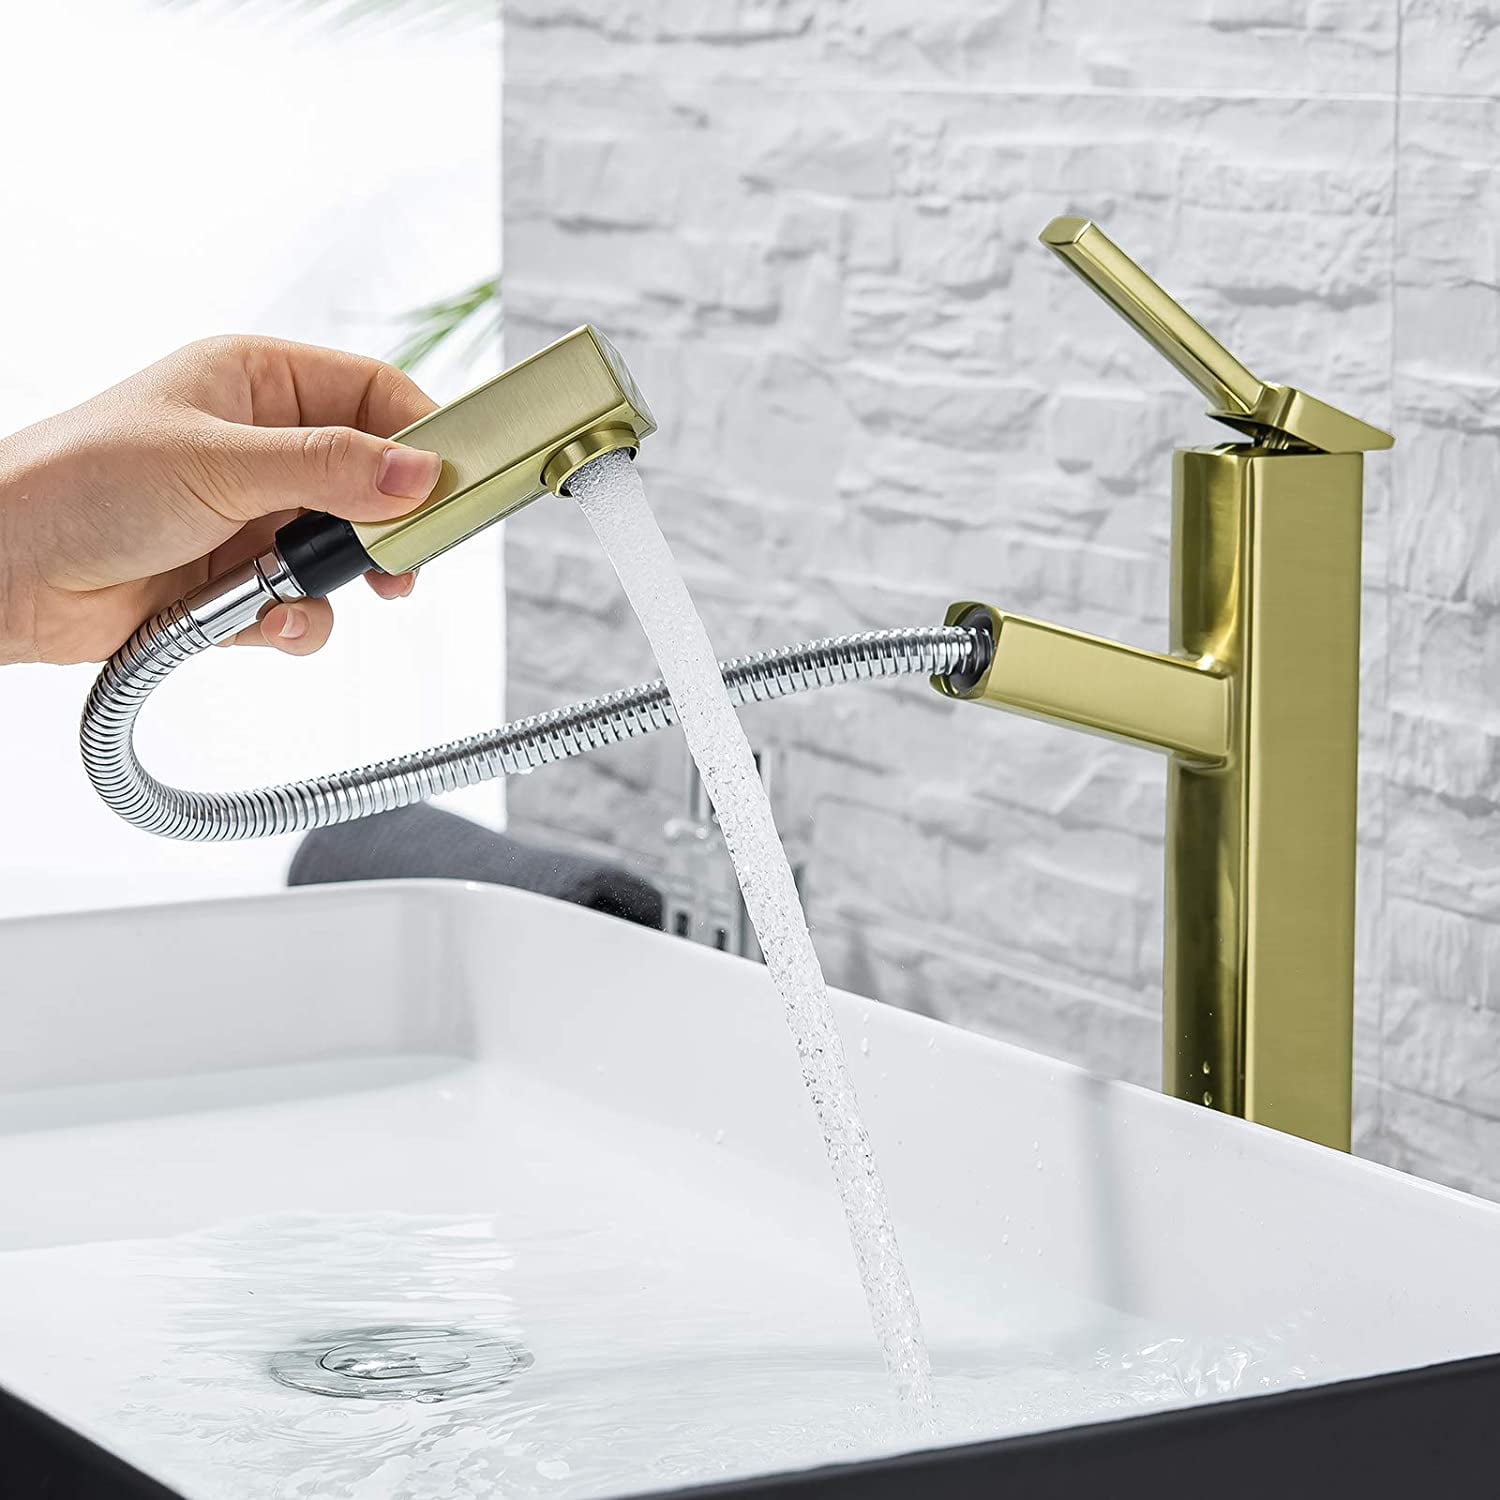 Gold single hole handle bathroom lav sink dragon mixer faucet Deck Mounted new 